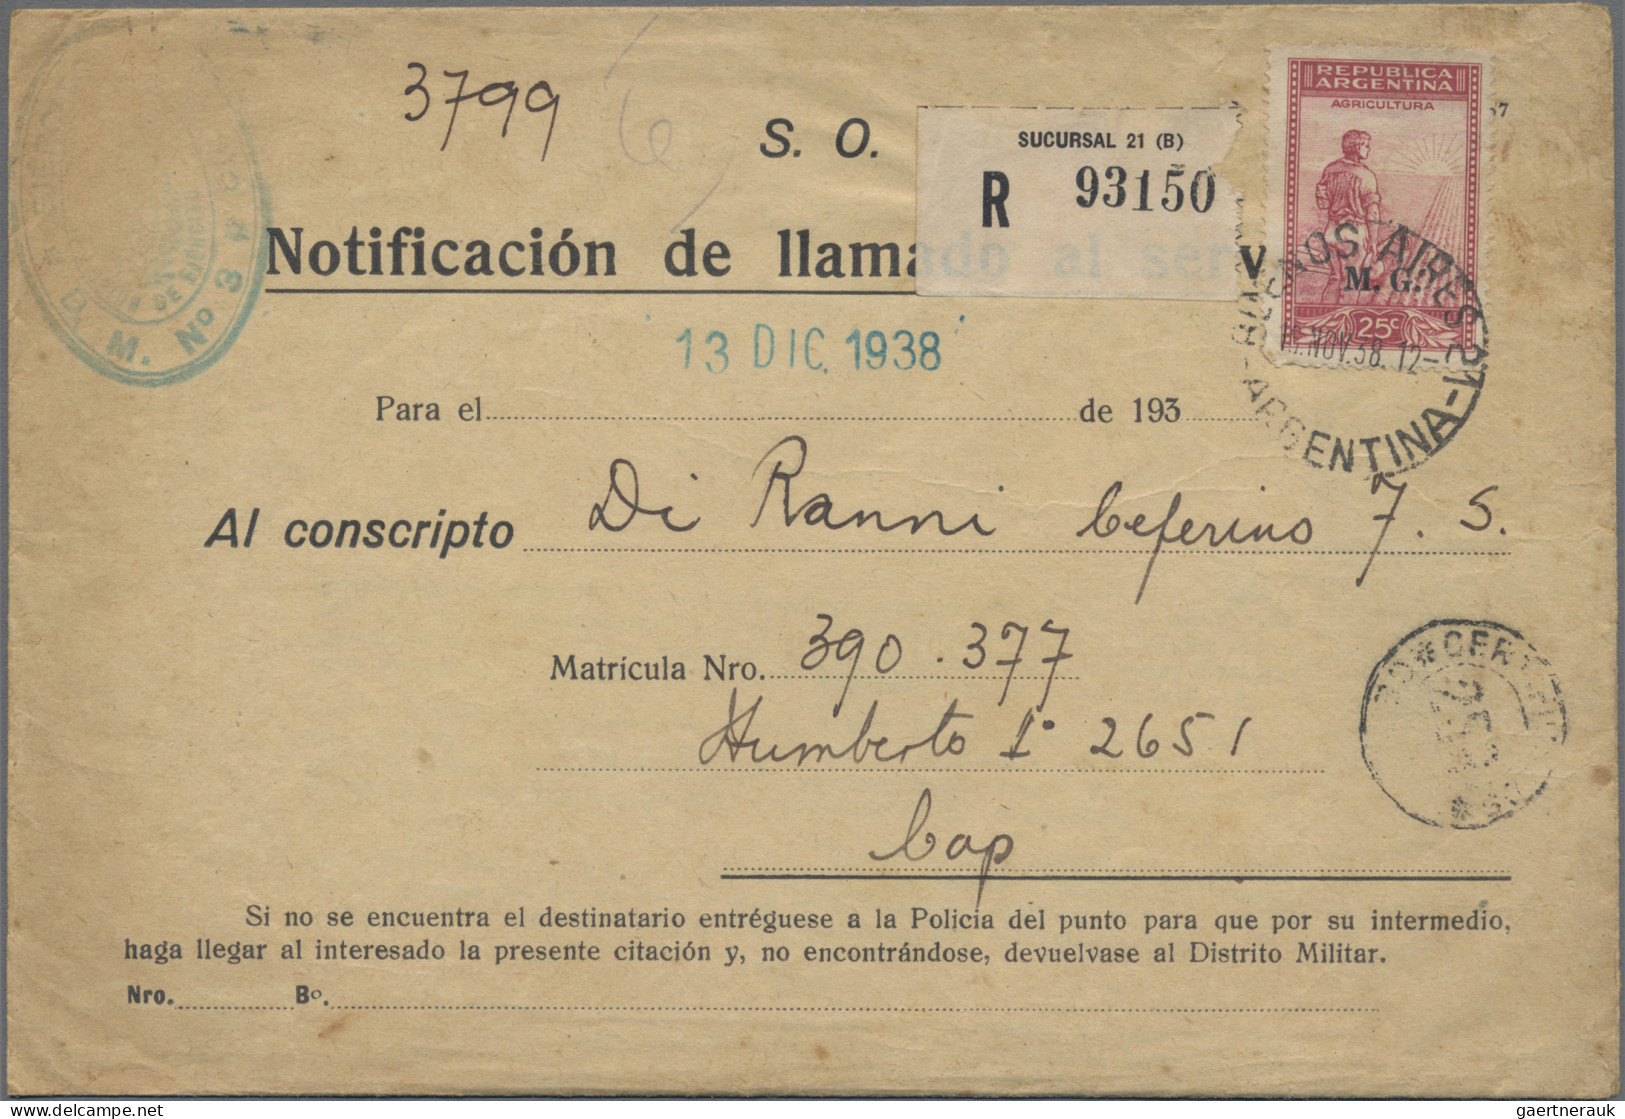 Argentina: 1900/2000's: Accumulation of covers, postcards, franked forms (subscr